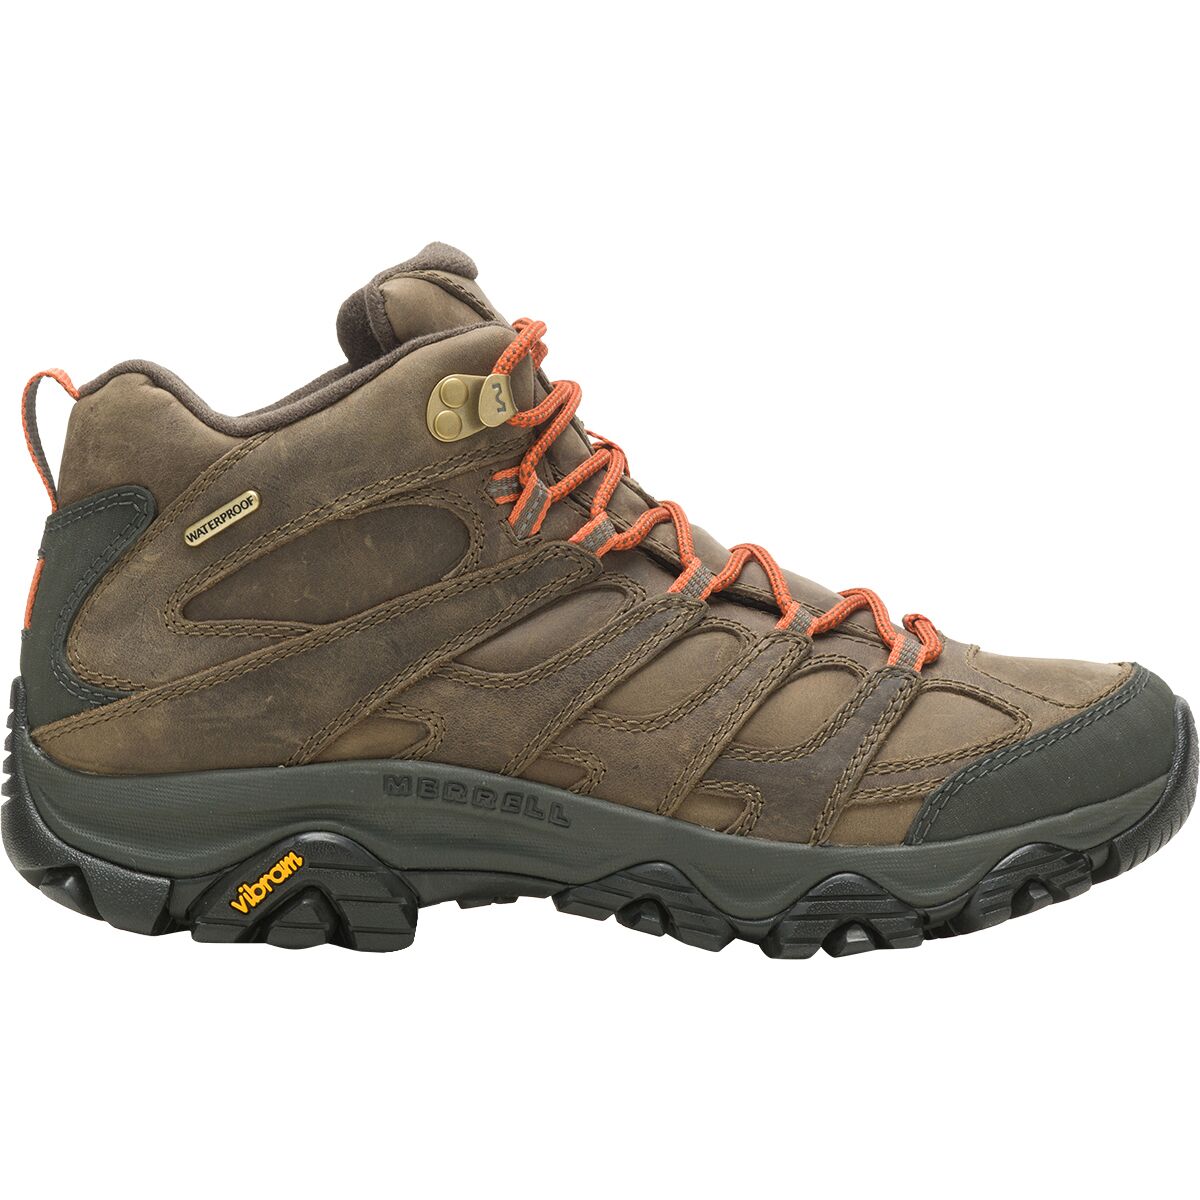 Moab 3 Prime Mid WP Hiking Boot - Wide - Men